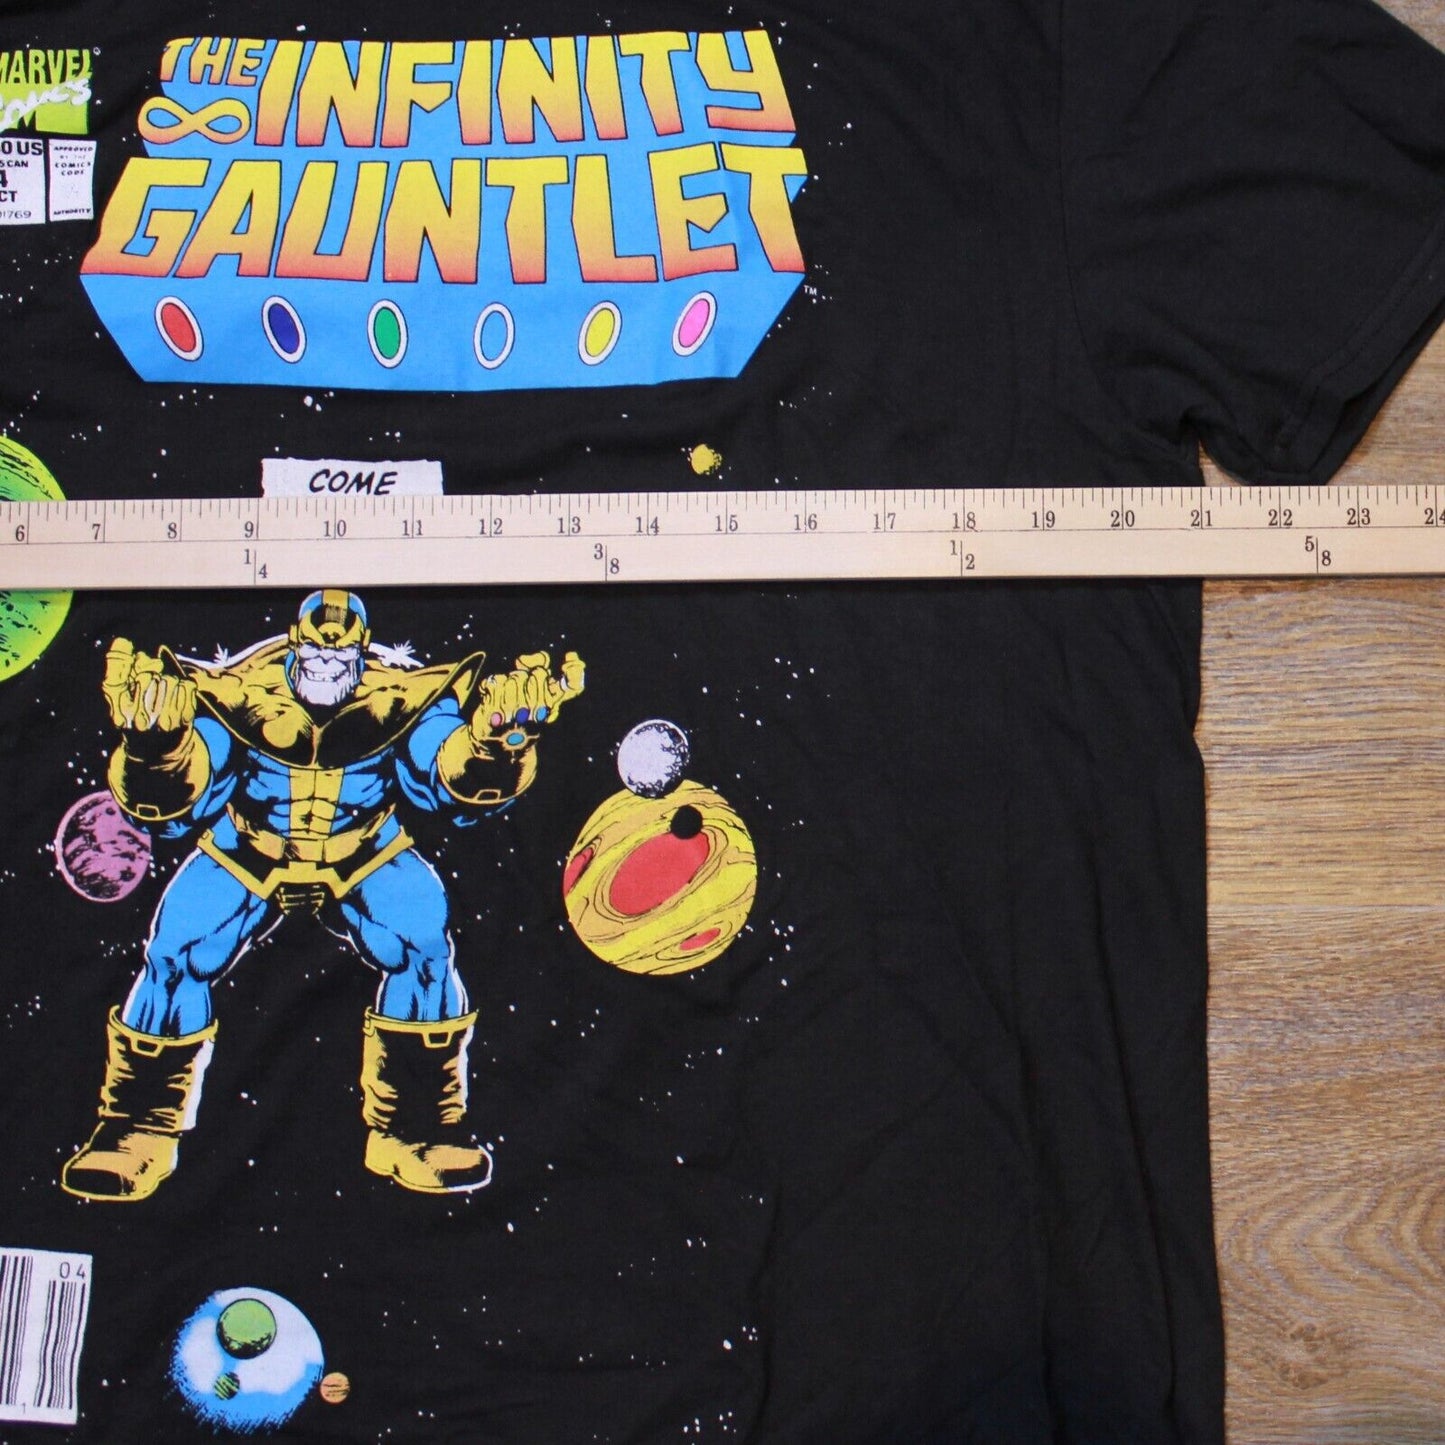 Marvel Comics The Infinity Gauntlet Comic Book Cover Thanos wGlove Men's - Large